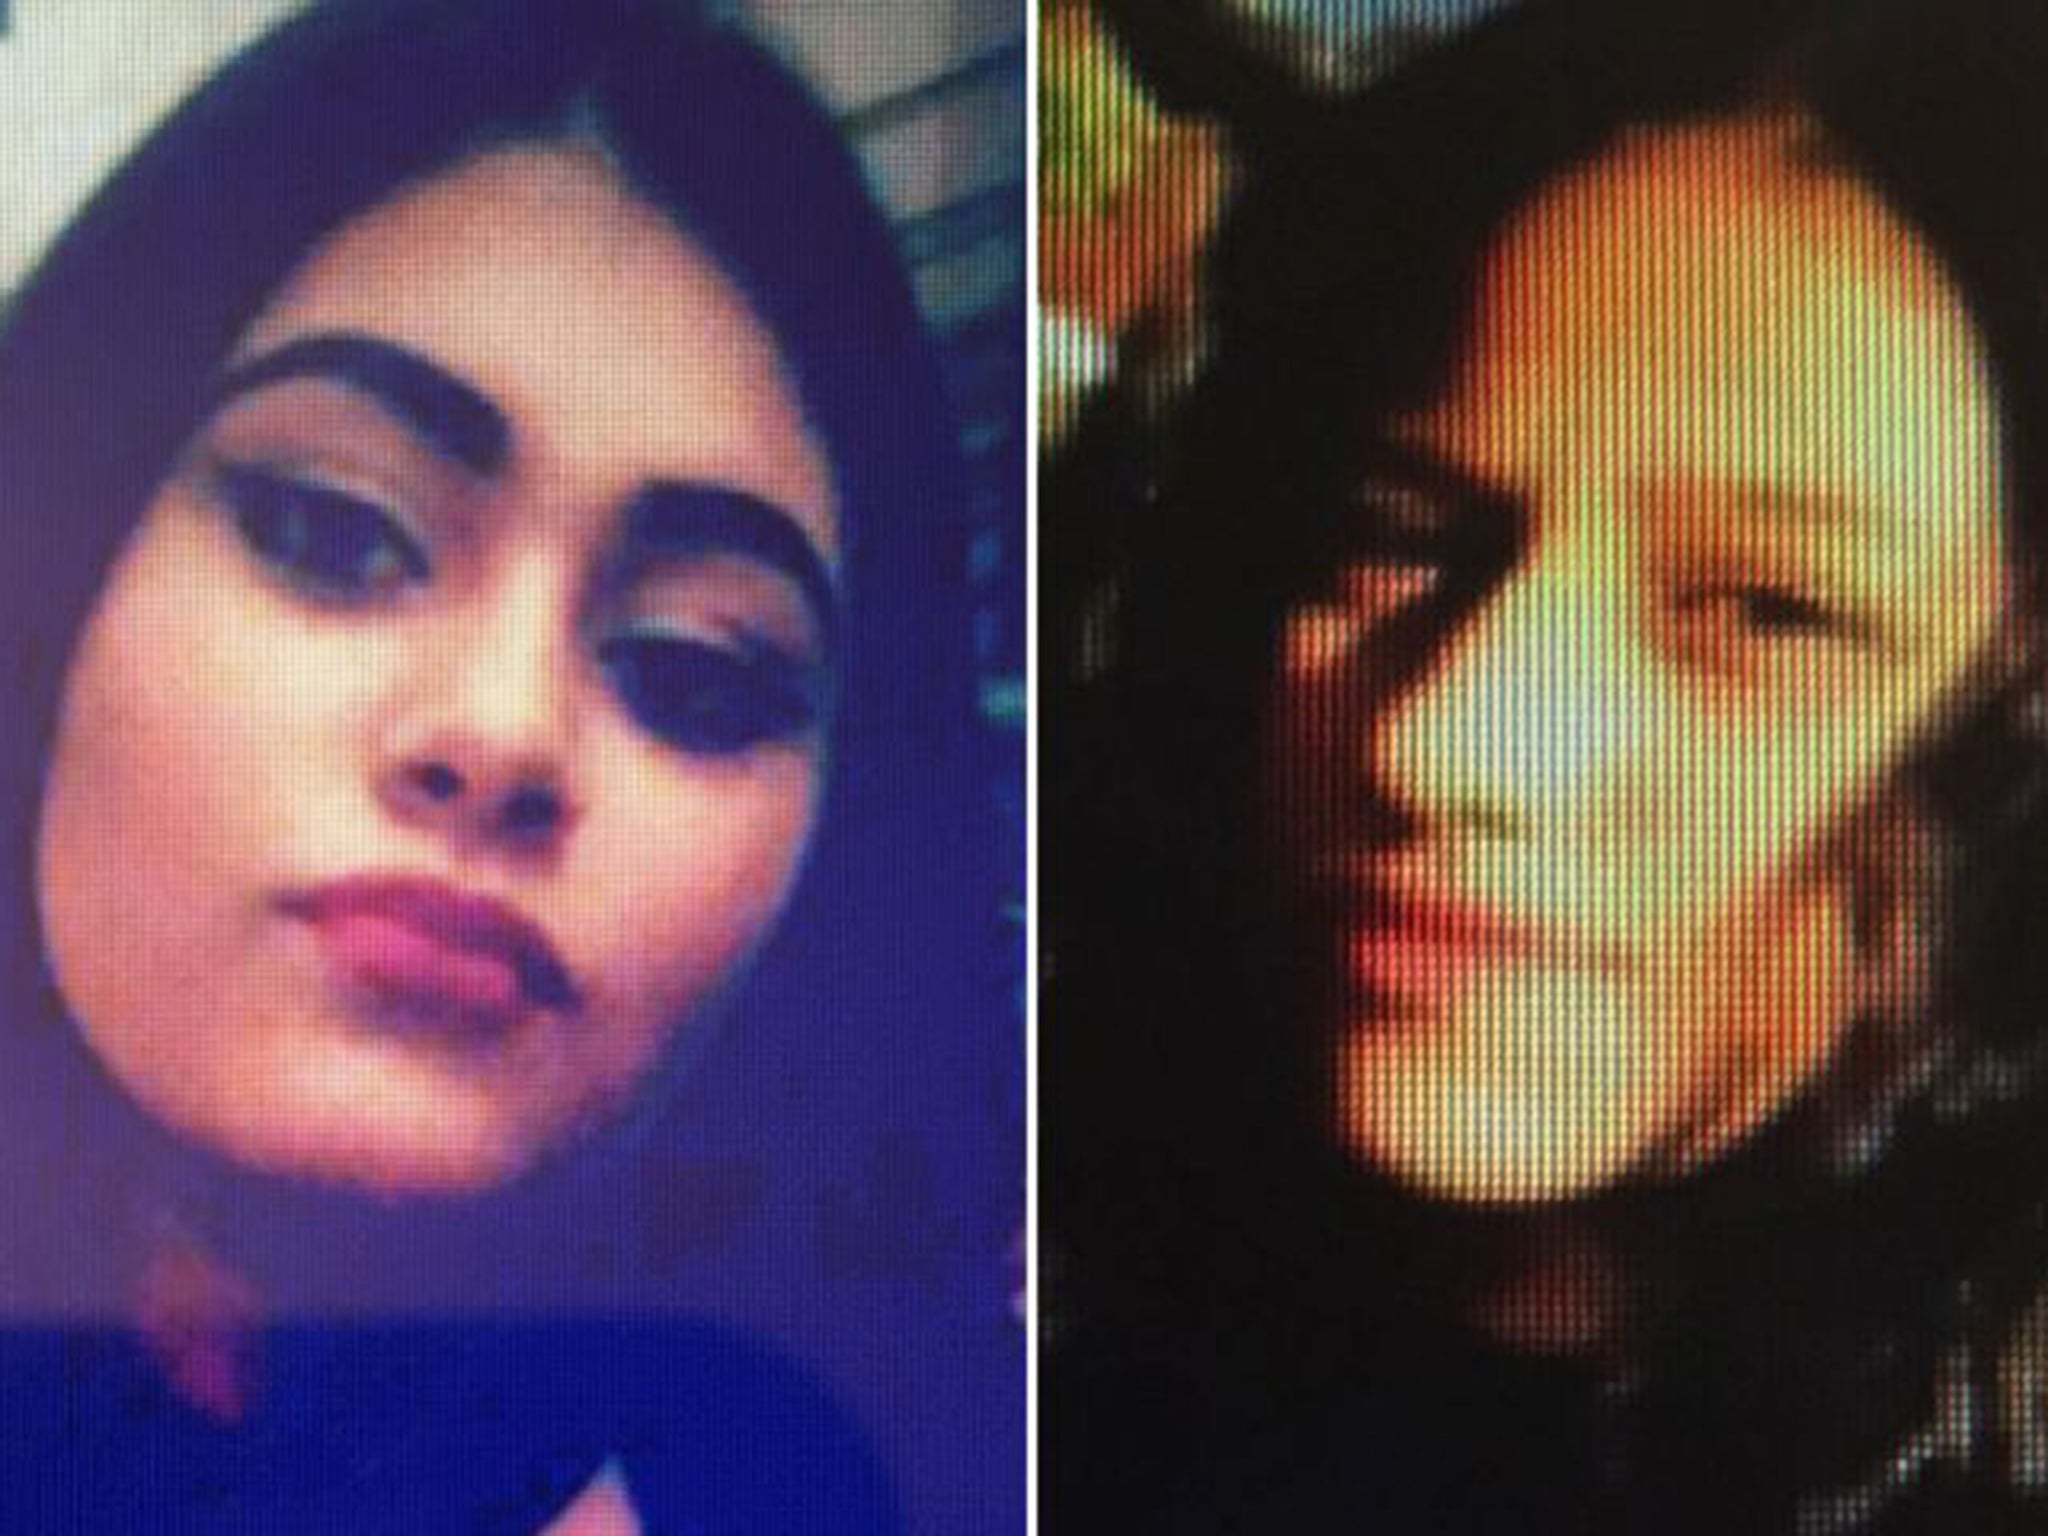 Kotlarova, 12 (left), who was killed at the scene after a hit and run in Oldham on New Year’s Eve, and Zaneta Krokova, 11 (right), who has since died in hospital from injuries she sustained in the collision